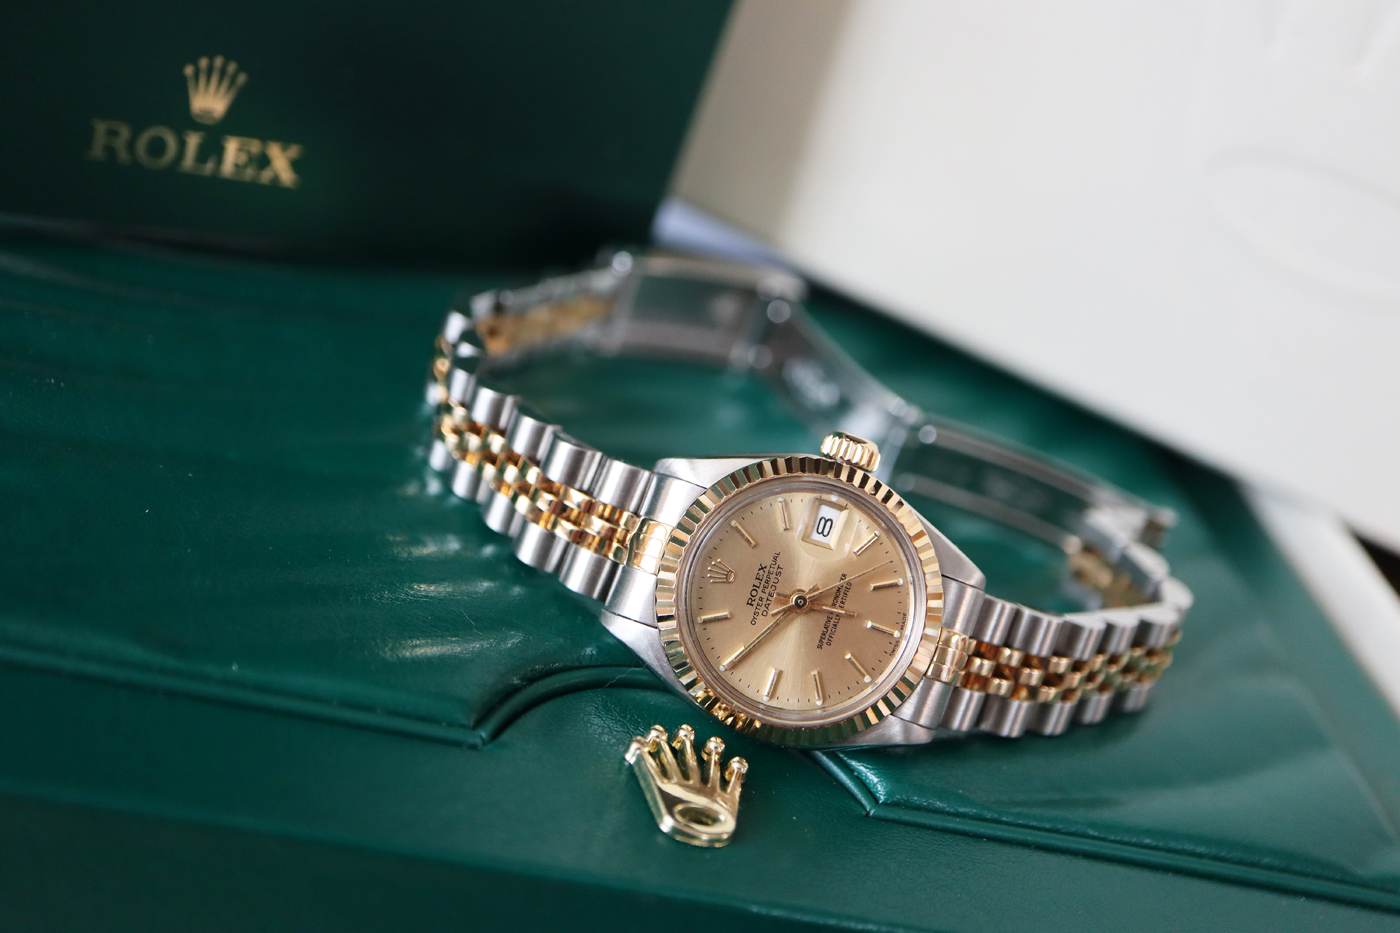 ROLEX DATEJUST 18K / STEEL *CHAMPAGNE* - BOX SET / BOOKLETS / TAGS - Image 7 of 13